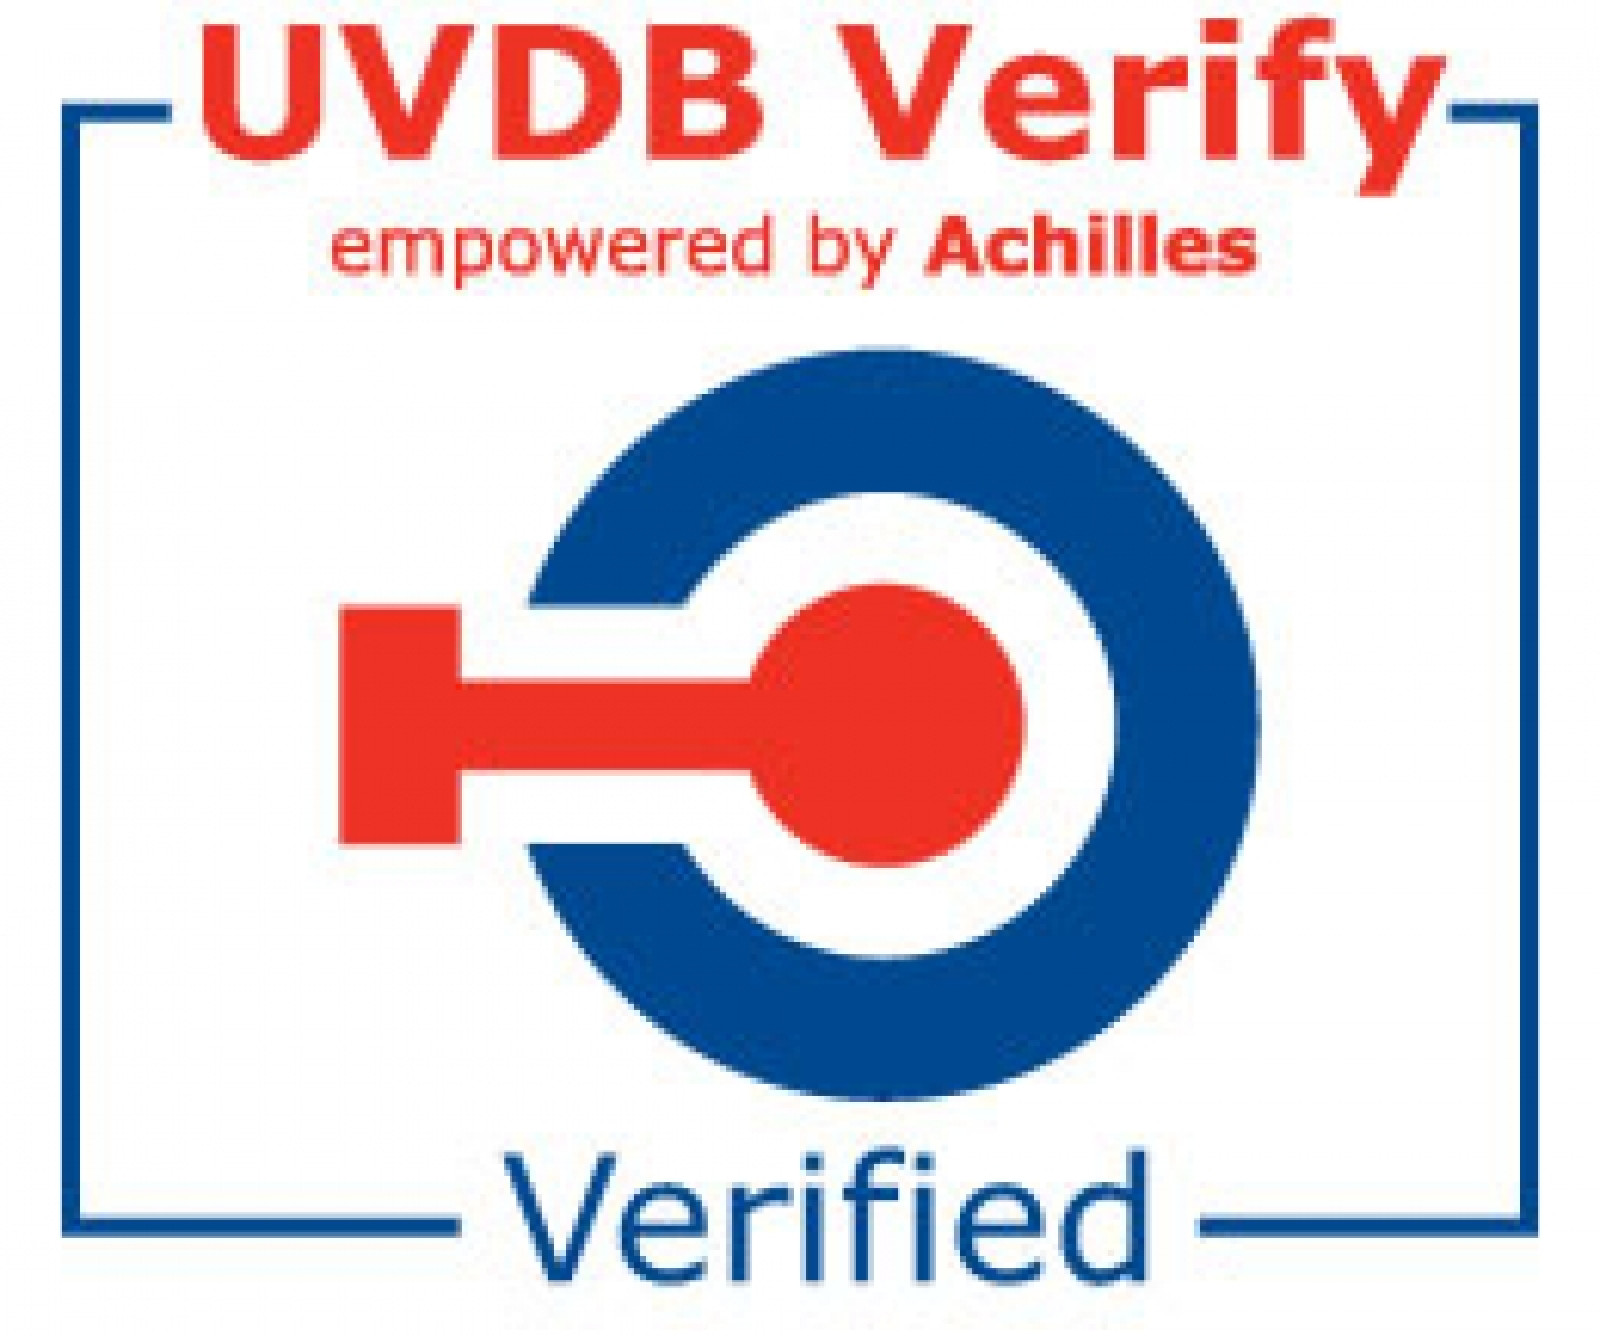 Rolevet are UVDB approved